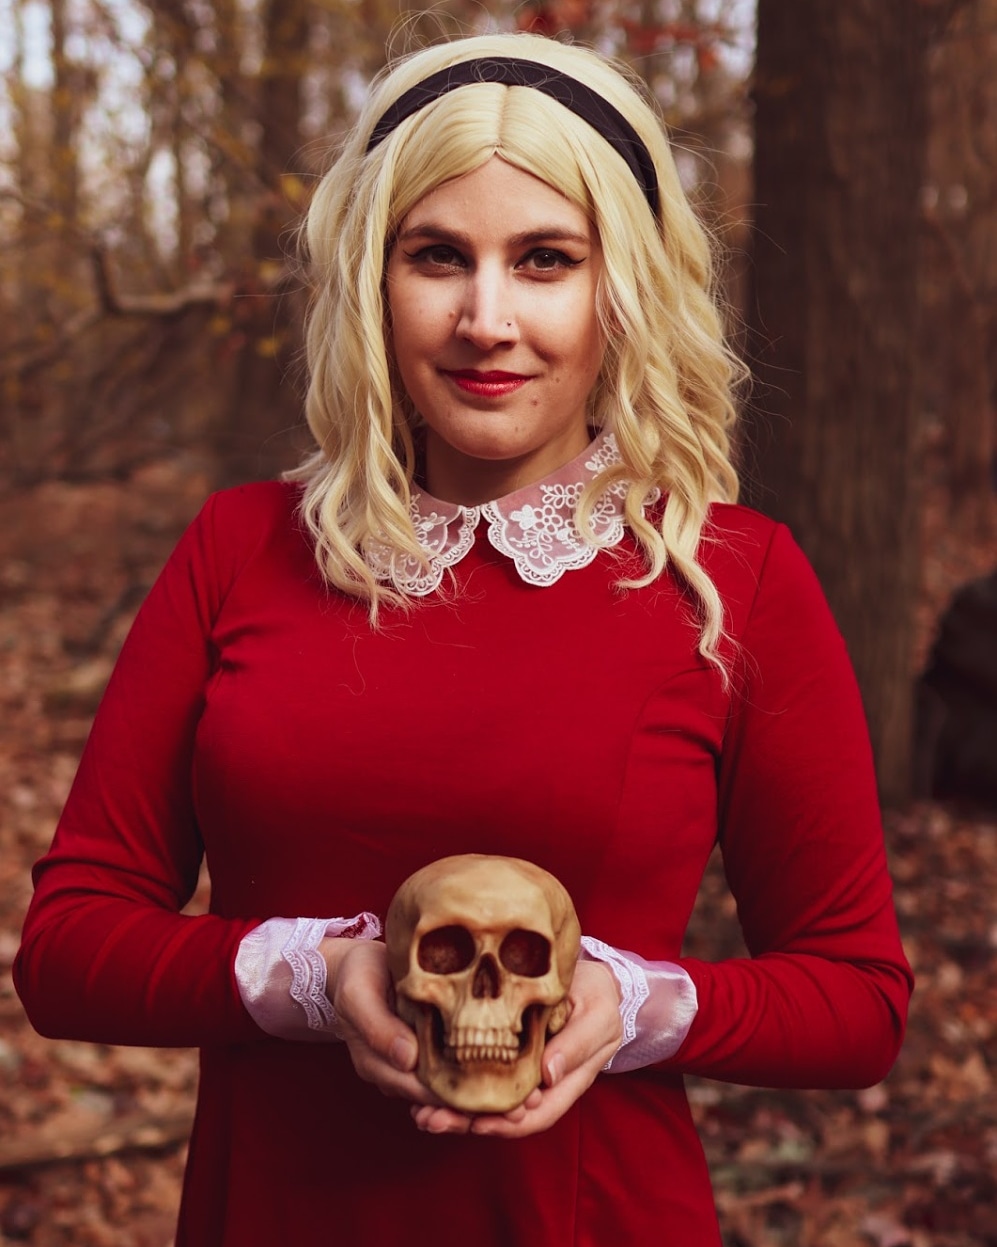 Roystroyer As Sabrina From Netflixs Chilling Adventure